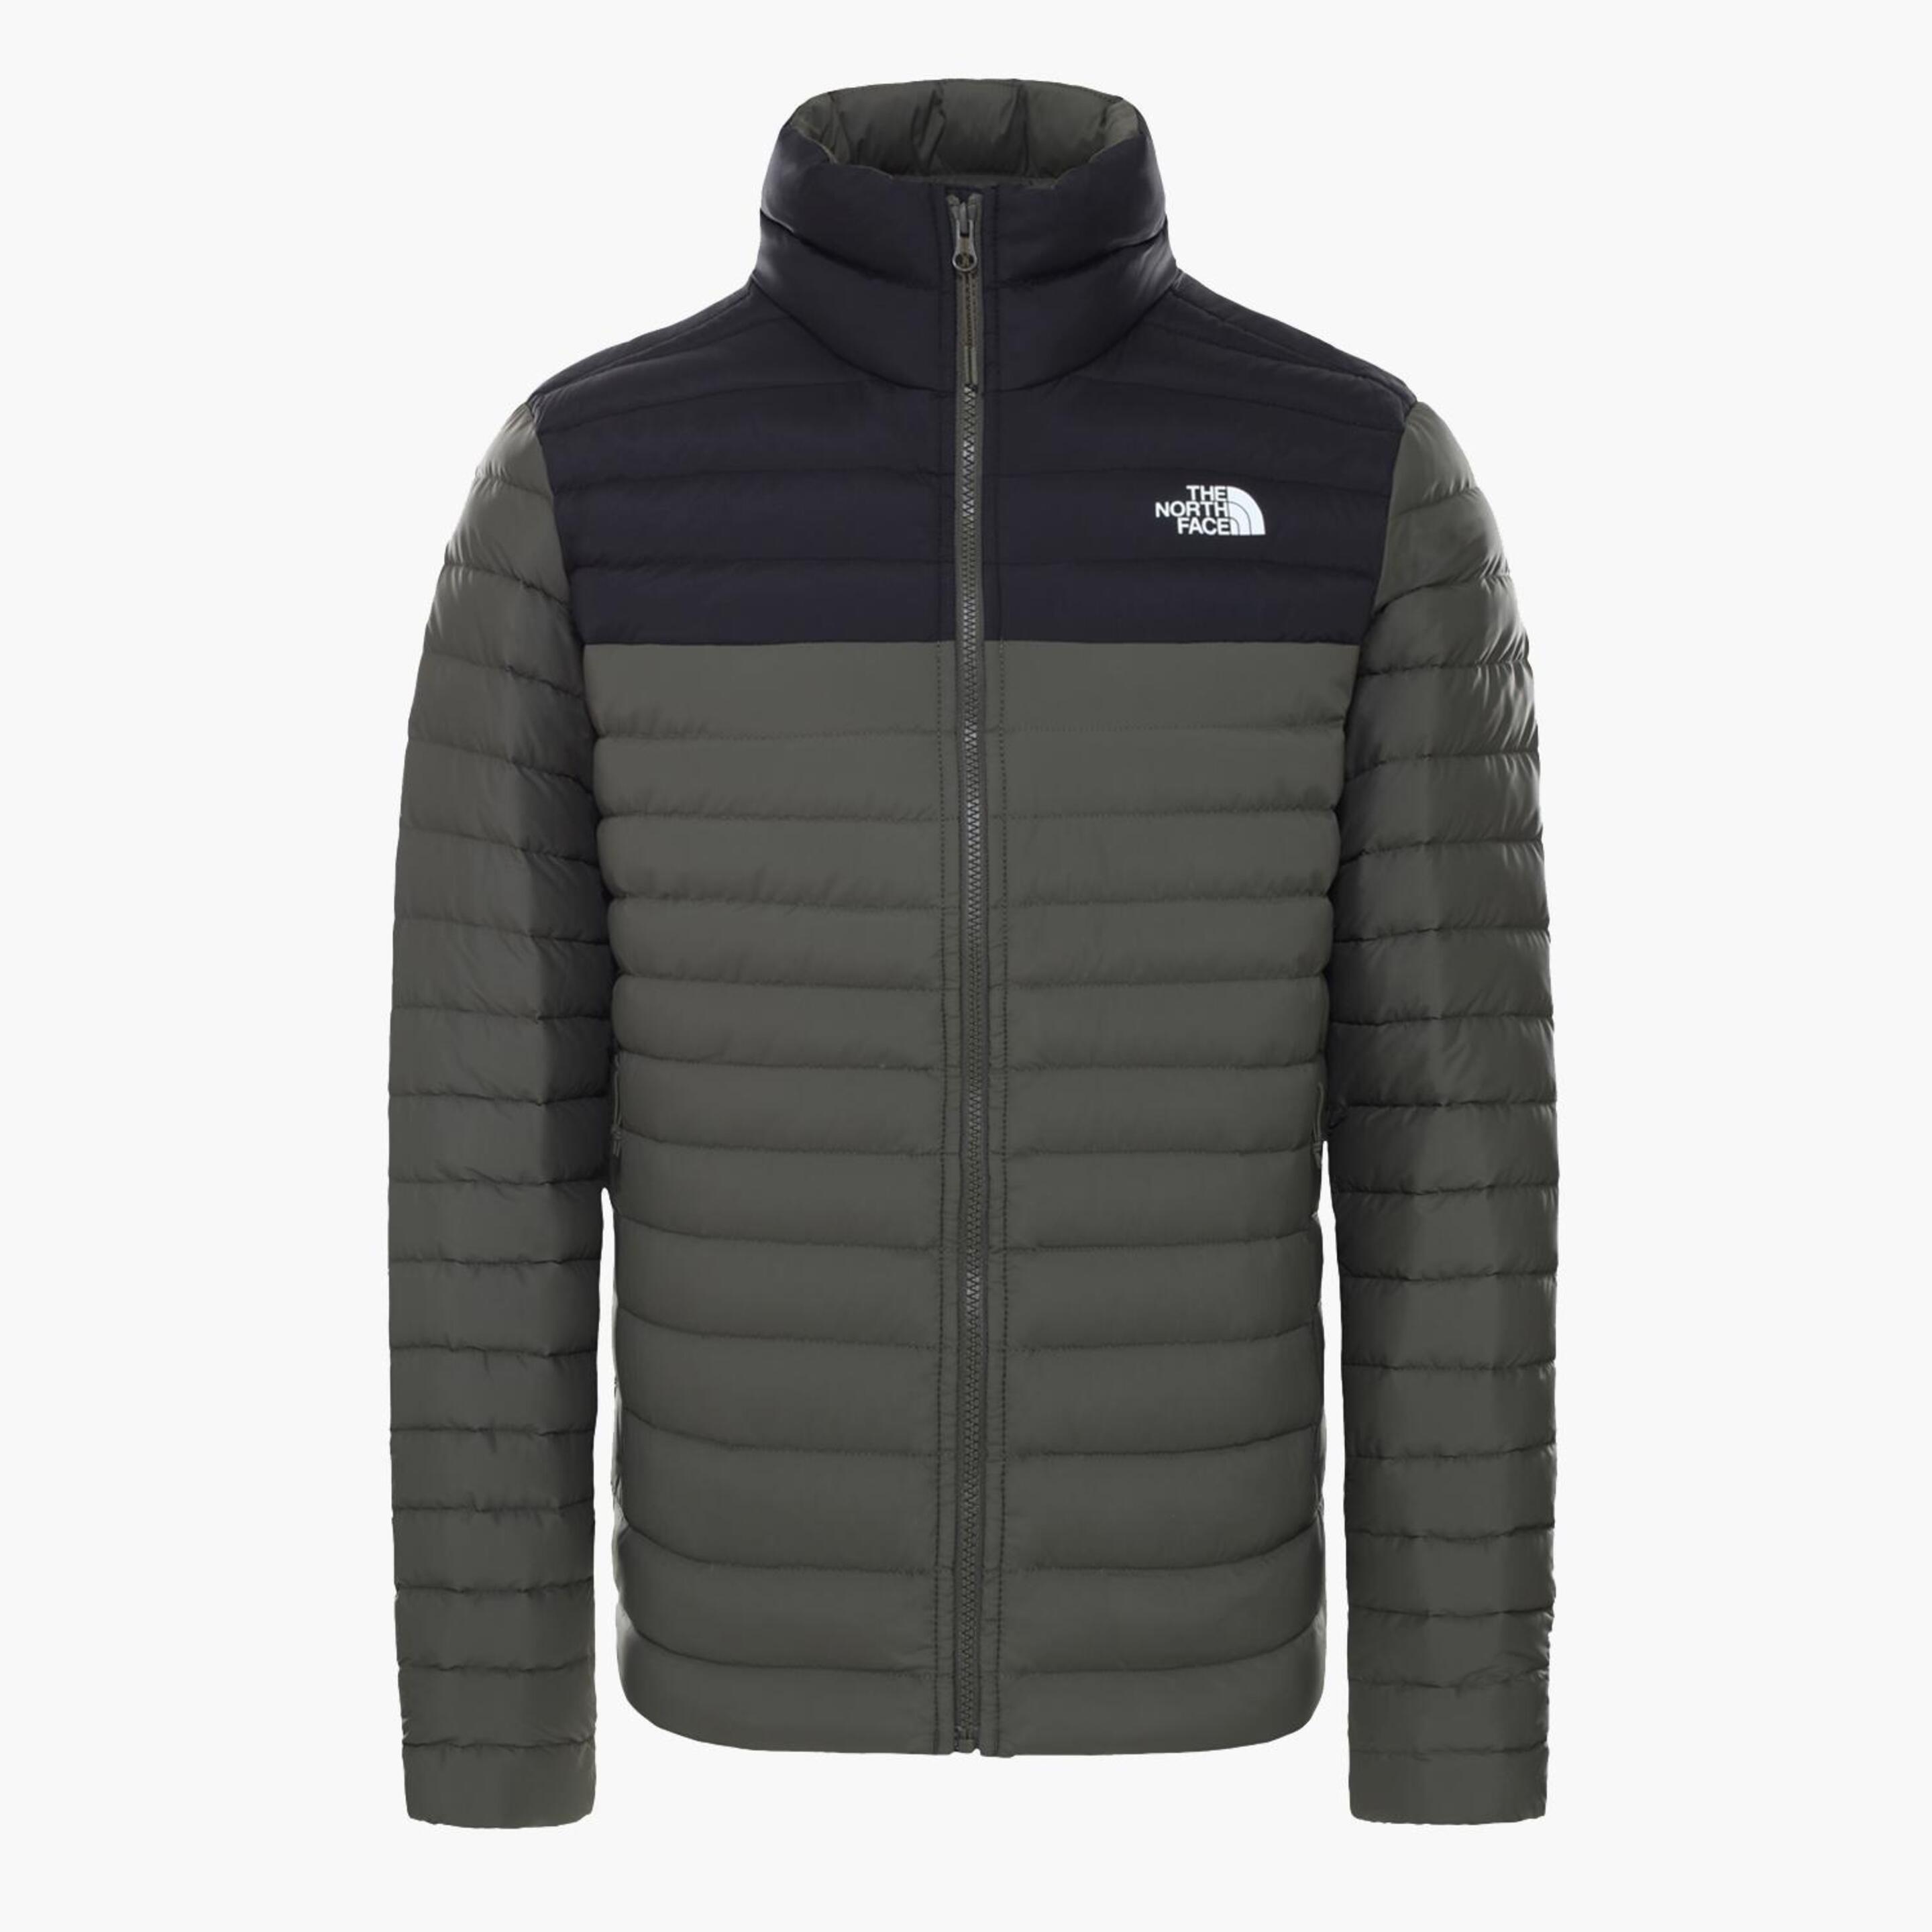 The North Face Stretch